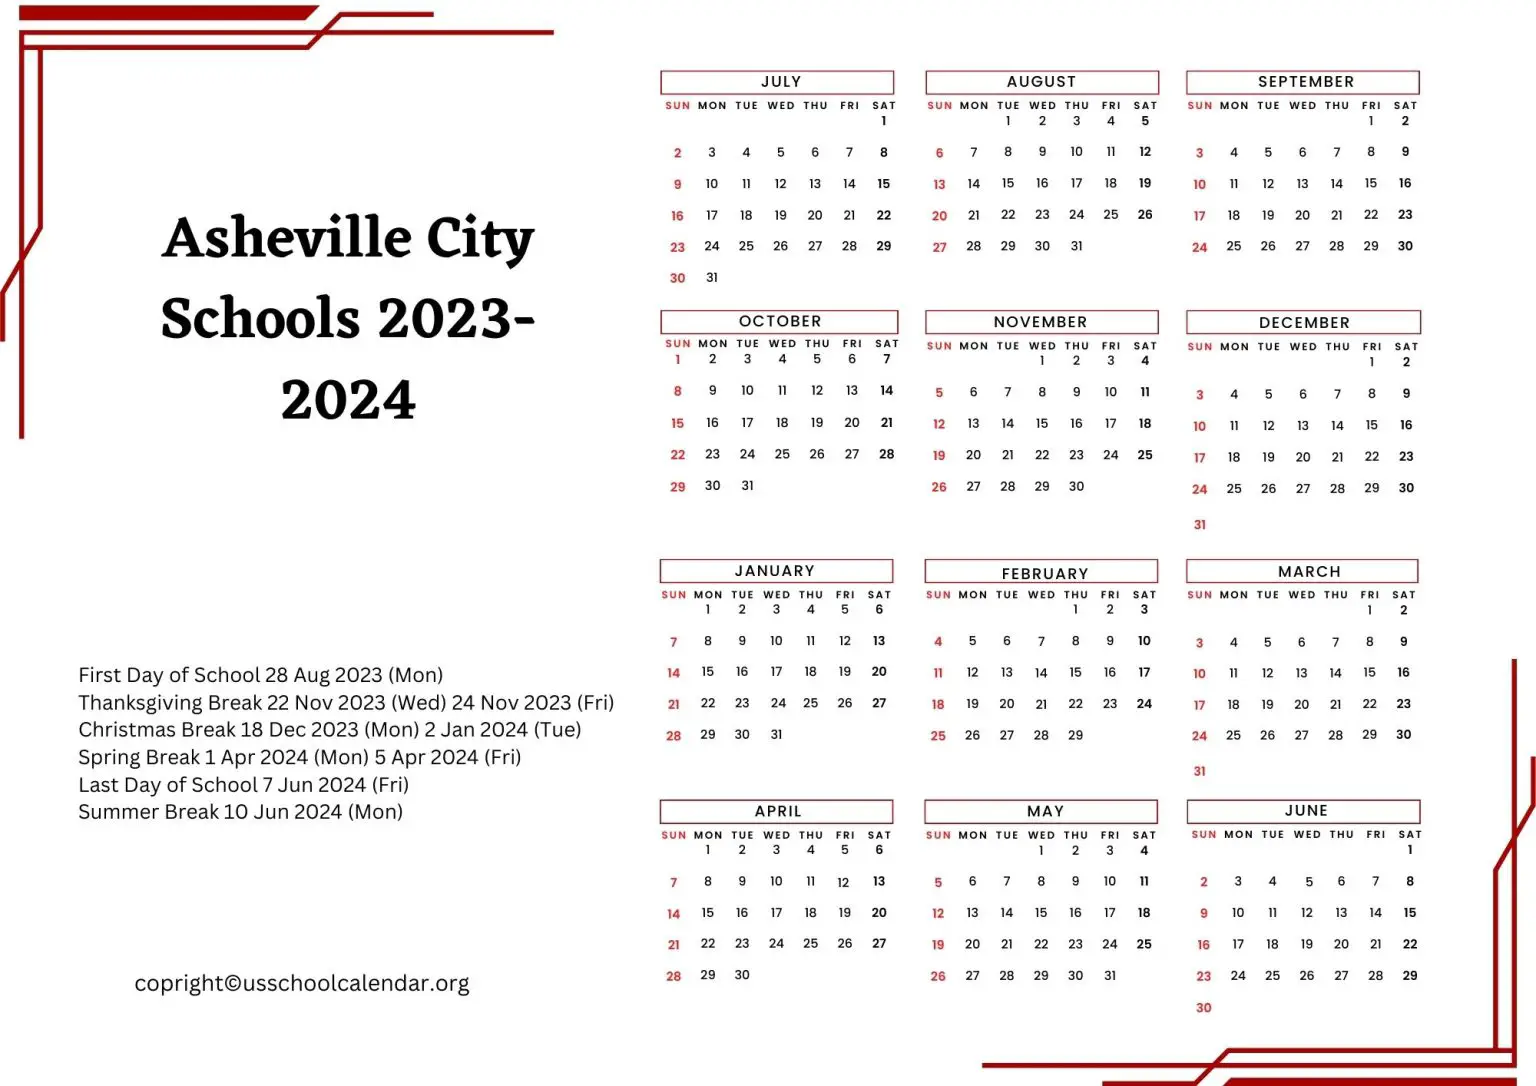 Asheville City Schools Calendar with Holidays 20232024